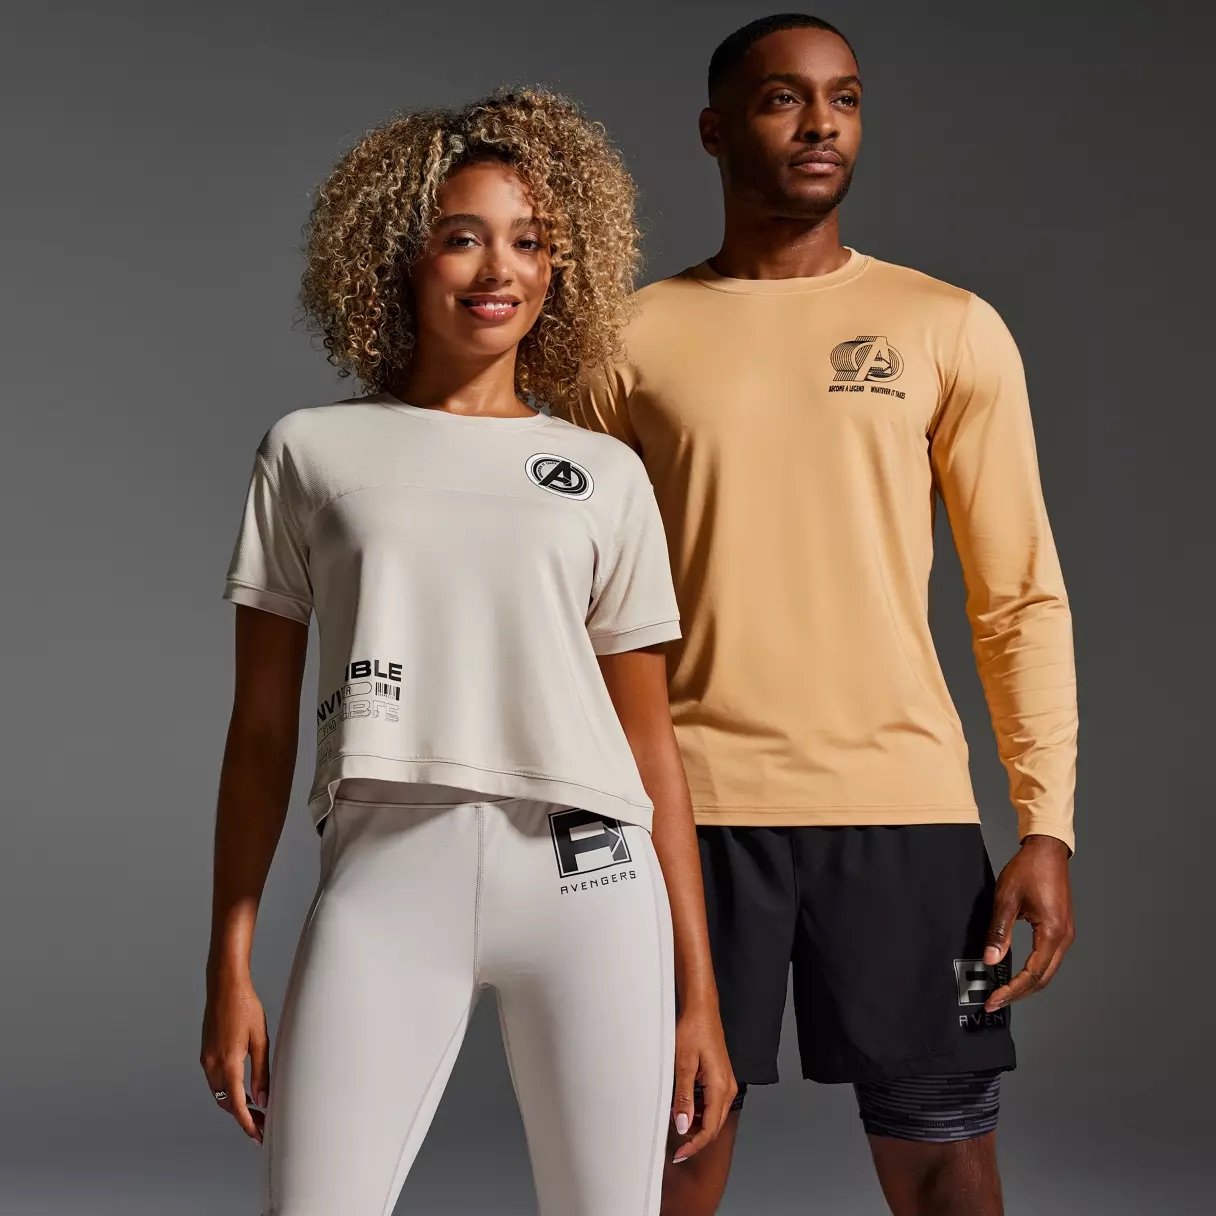 Marvel Fitness Collection on shopDisney — EXTRA MAGIC MINUTES